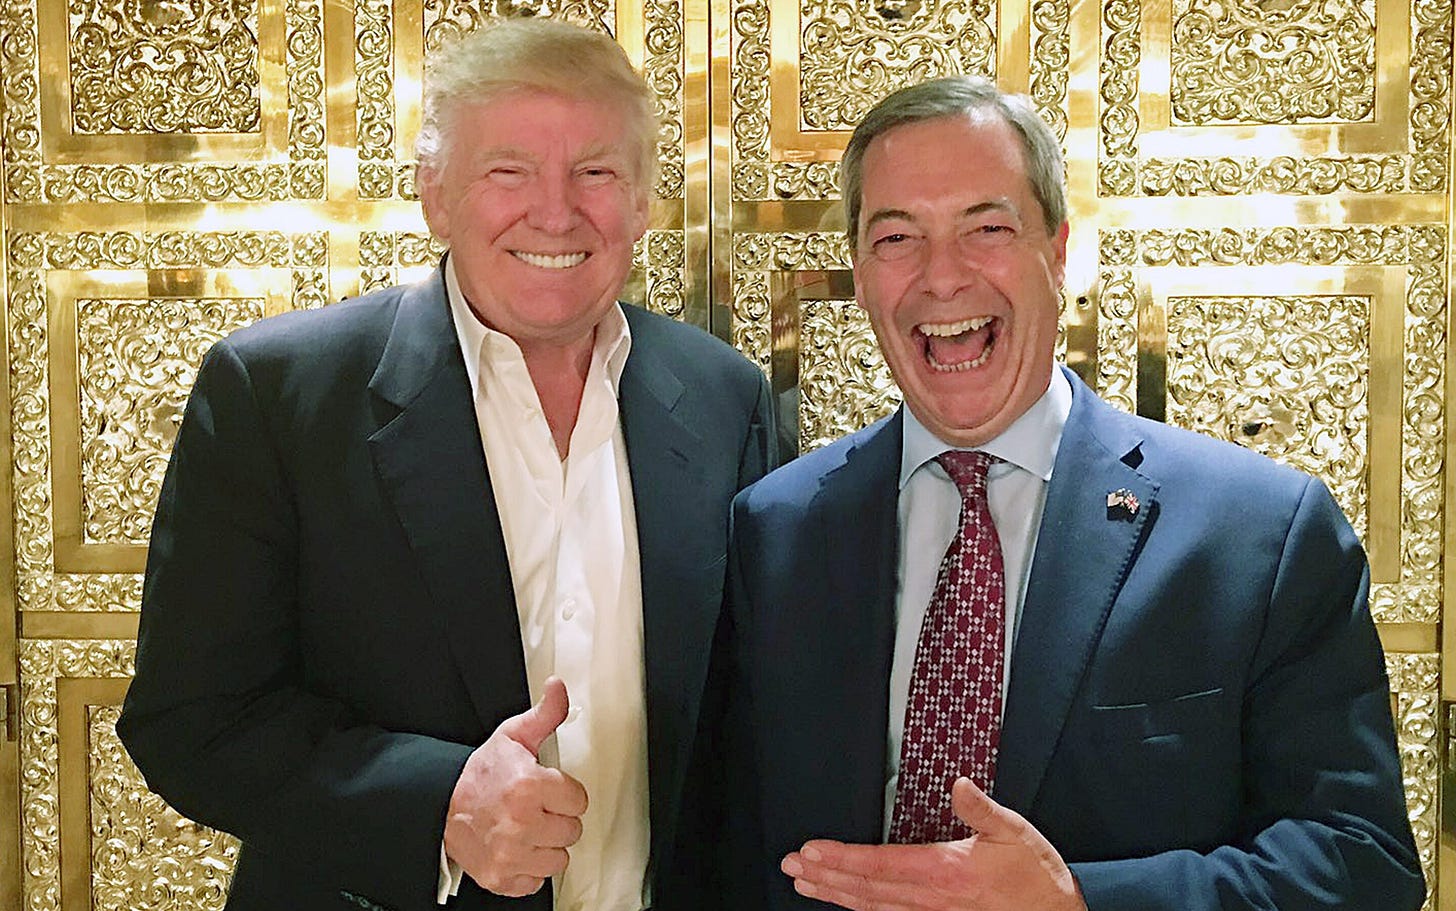 Farage & Trump: The story behind 'that' photograph